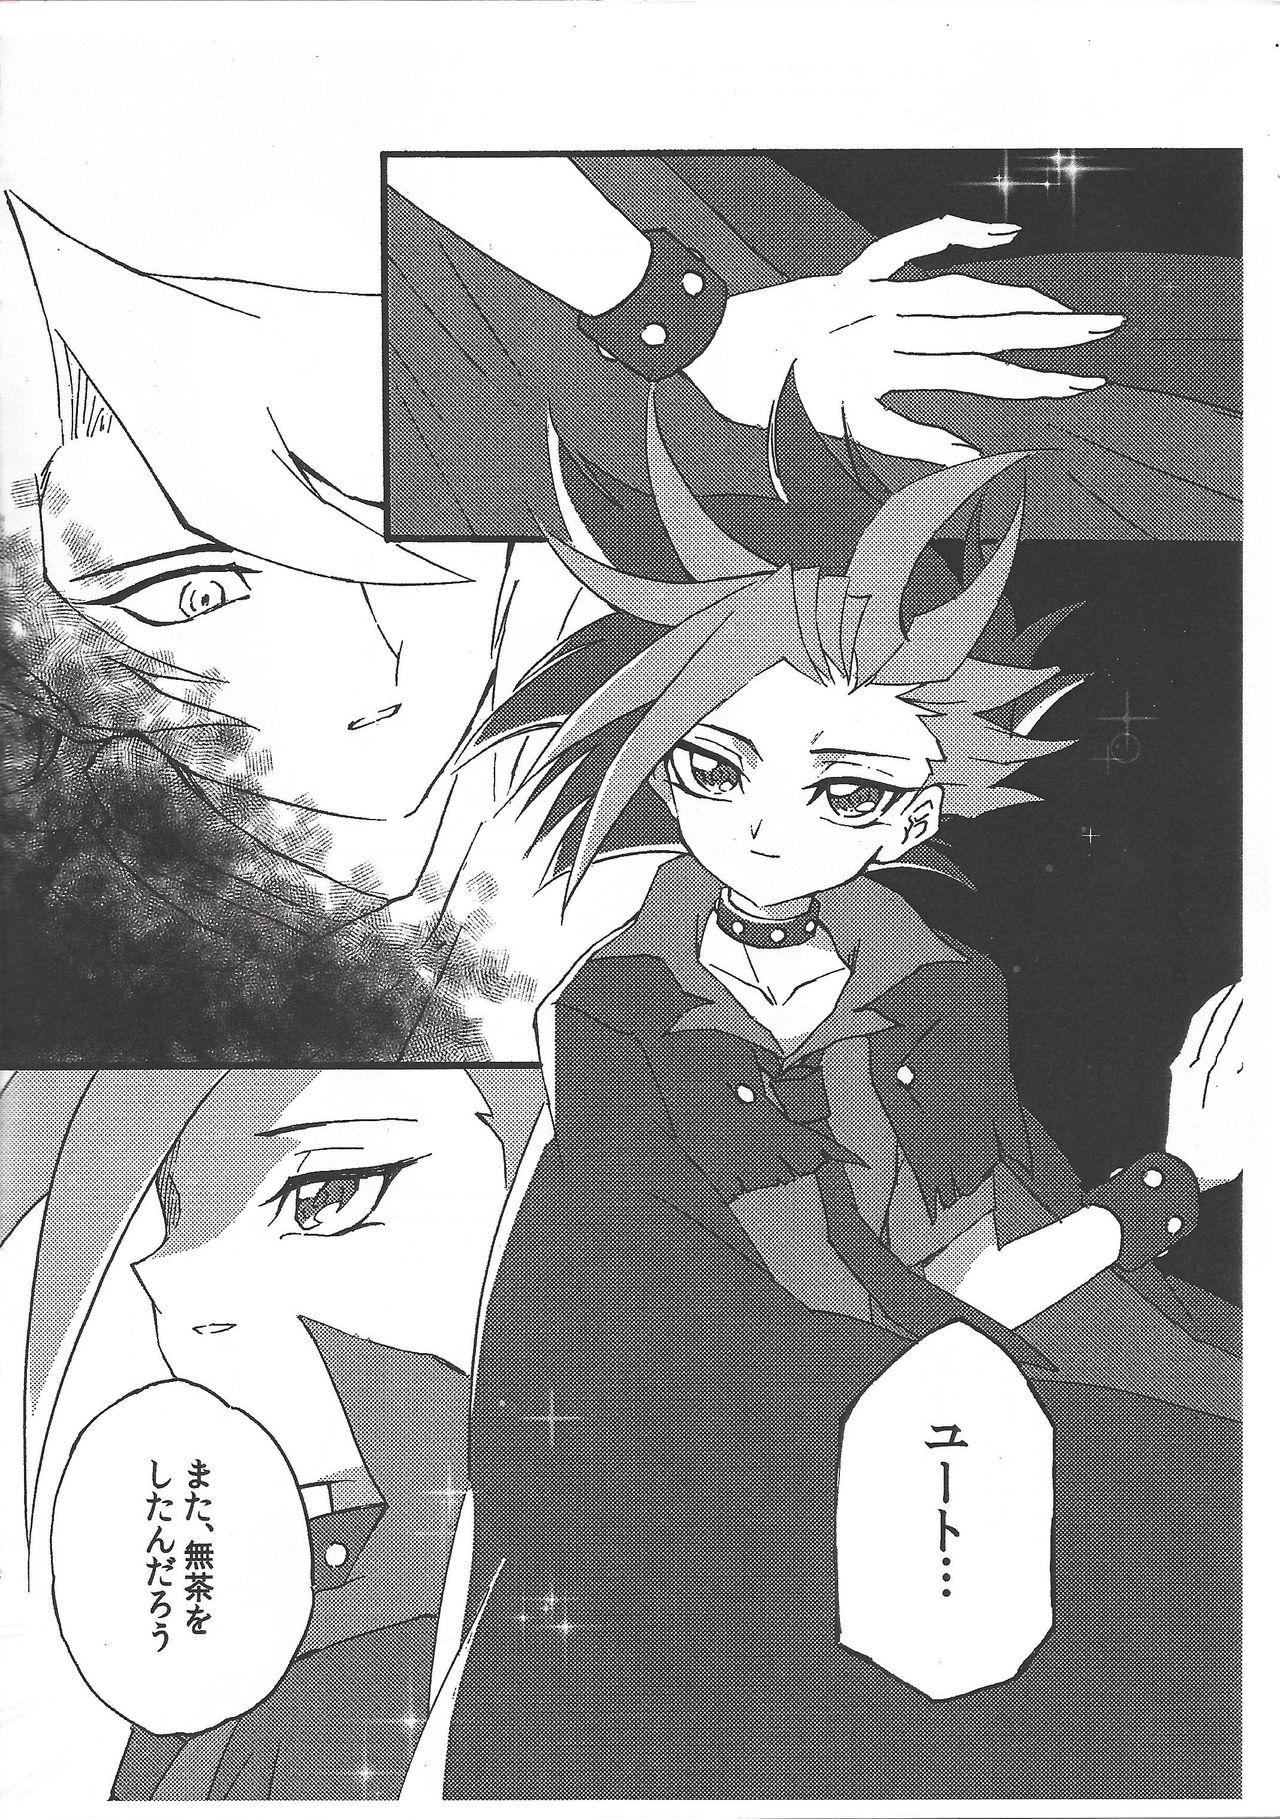 Hot GHOST ROOM - Yu gi oh arc v Buttfucking - Page 3